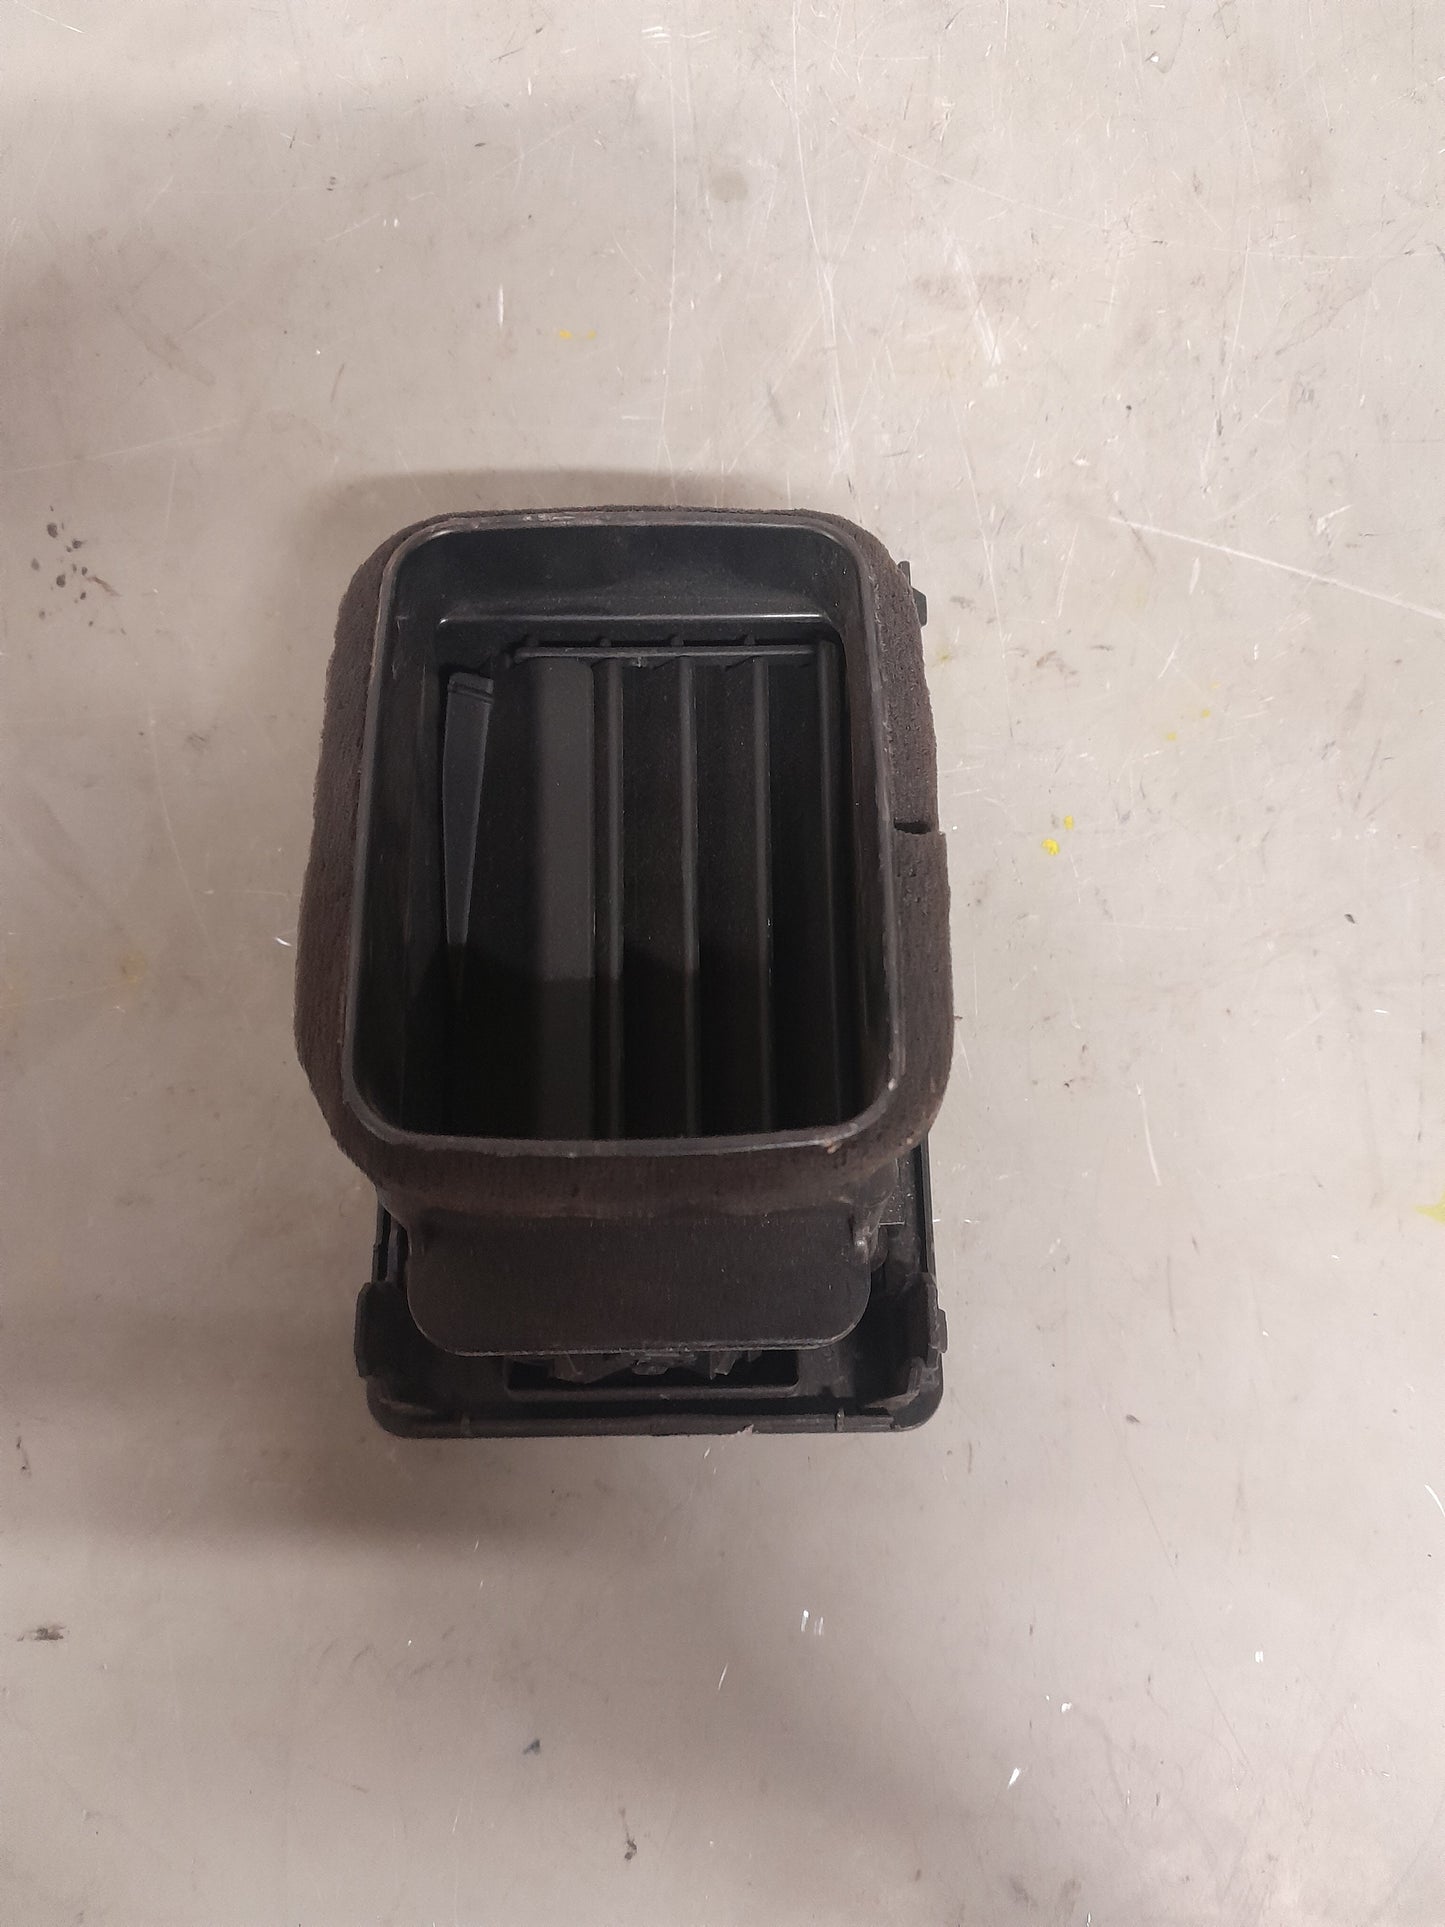 Toyota Hilux Air Conditioning Vent